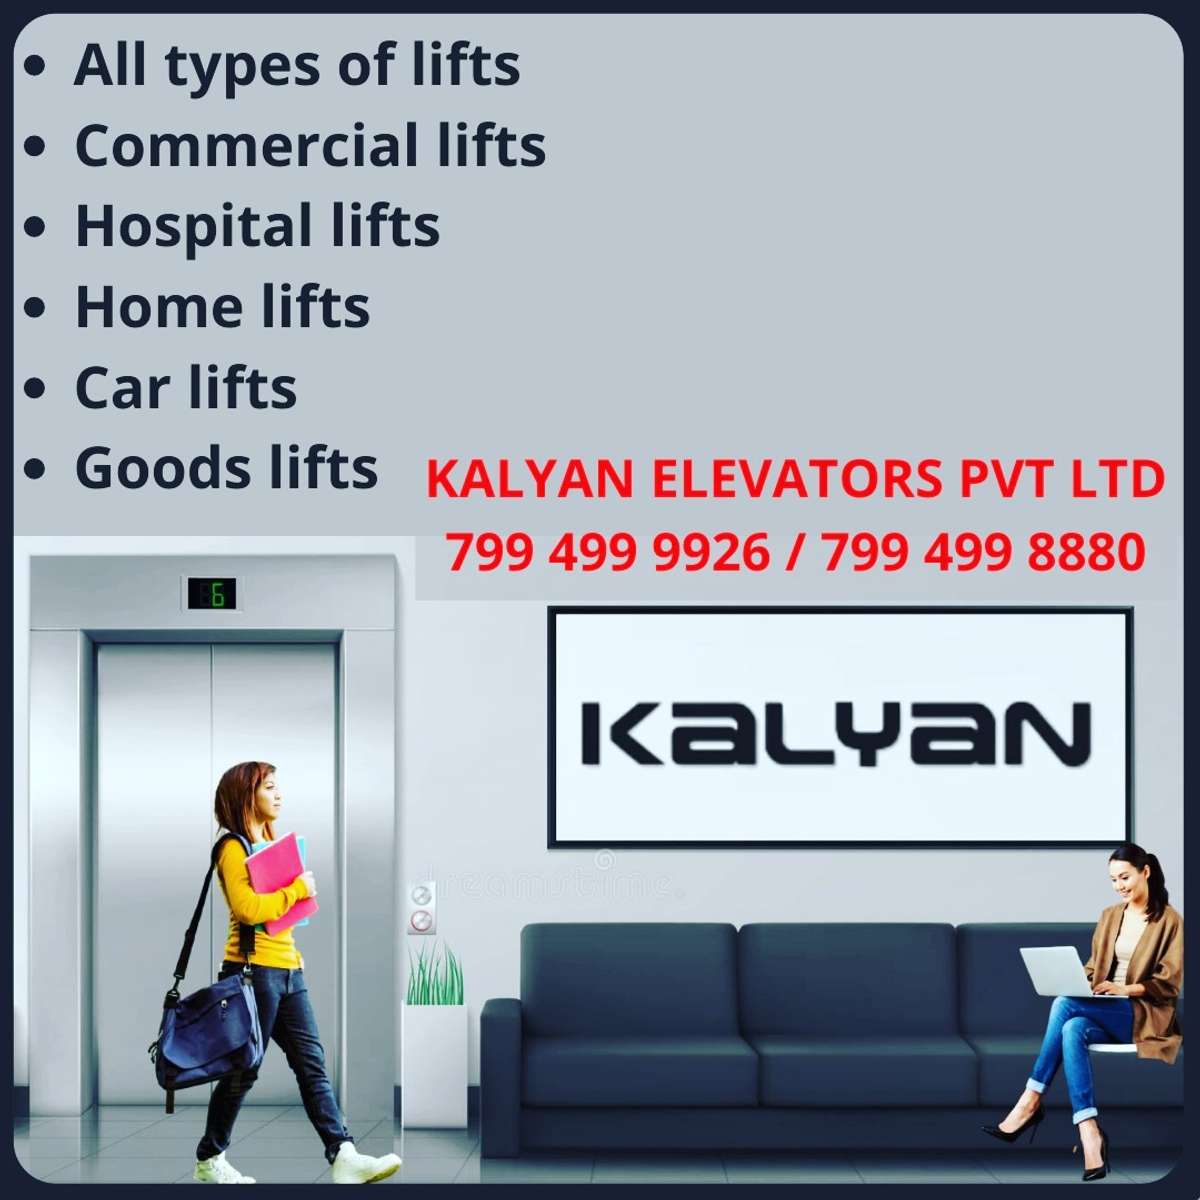 Kalyan Home Elevators offers the long-awaited solution to vertical mobility within homes at affordable prices and easy-to-use features. Our customized and aesthetically designed home lifts are easily installable in preexisting homes as well as houses under construction, and help you relieve the headache of climbing. More details:- ❤❤❤